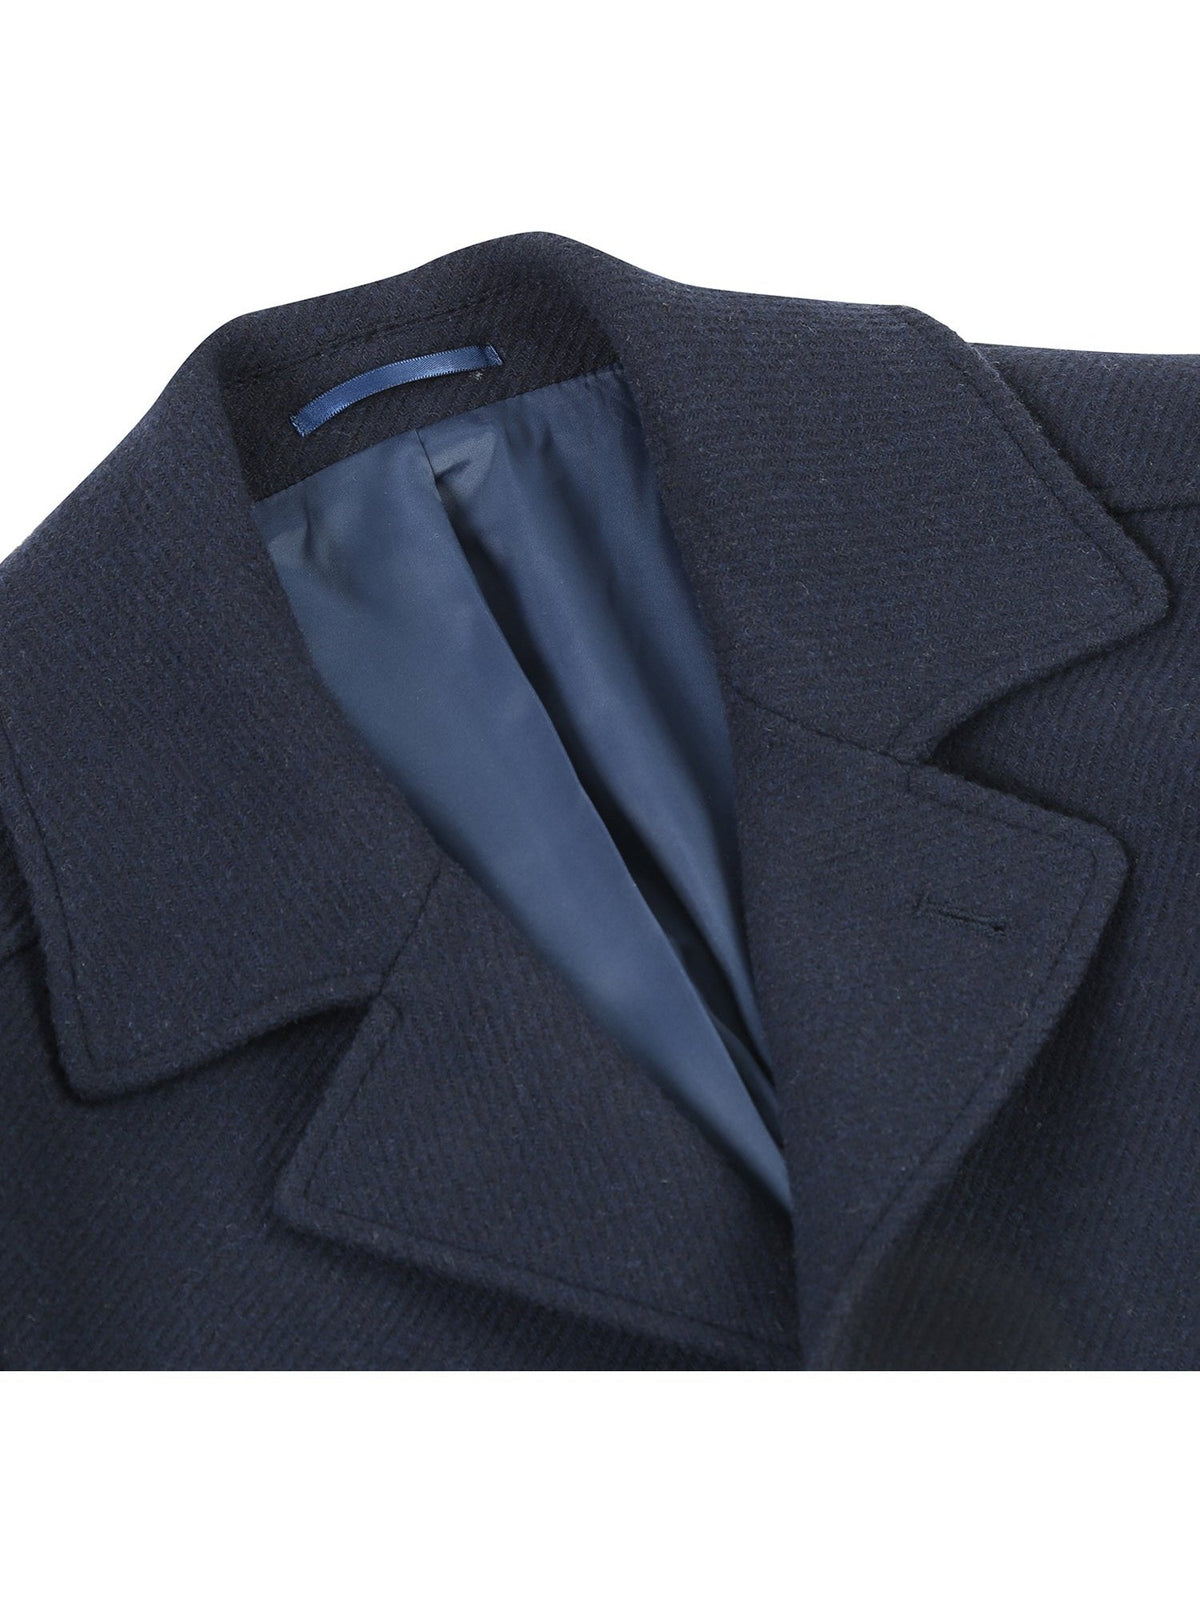 English Laundry Solid Navy Wool Blend Long Coat